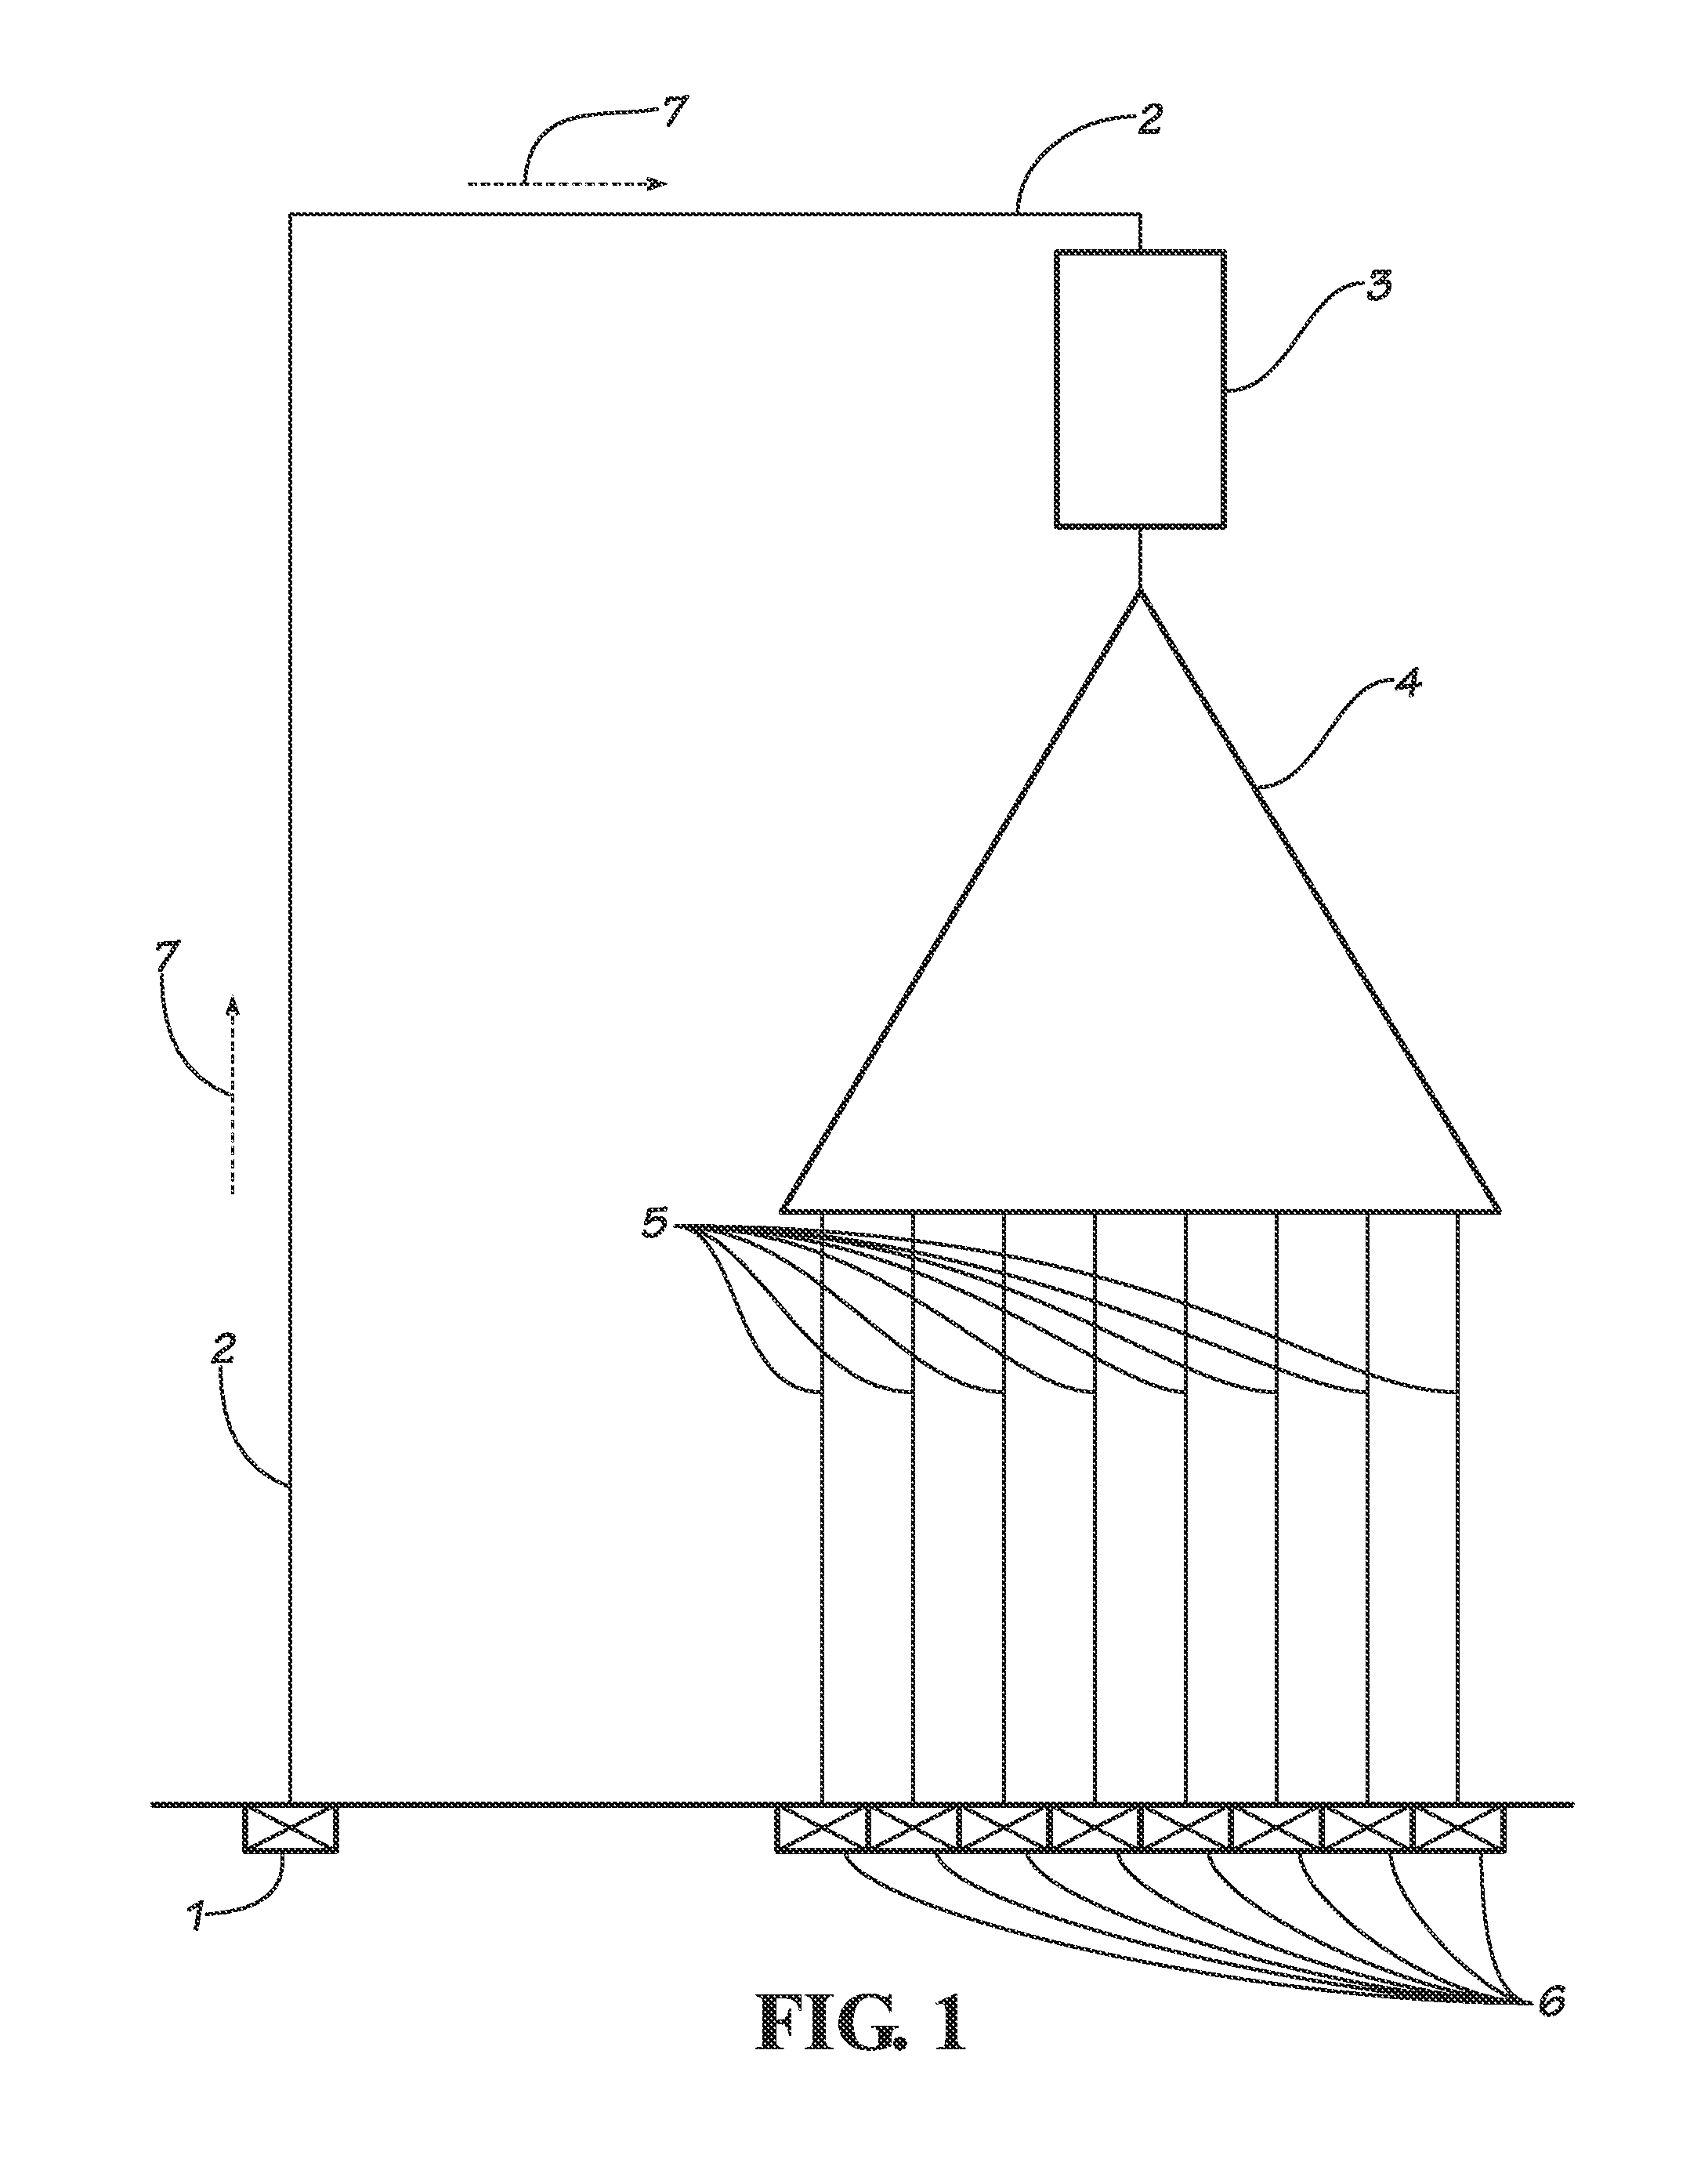 Multi- purpose apparatus for switching, amplifying, replicating, and monitoring optical signals on a multiplicity of optical fibers